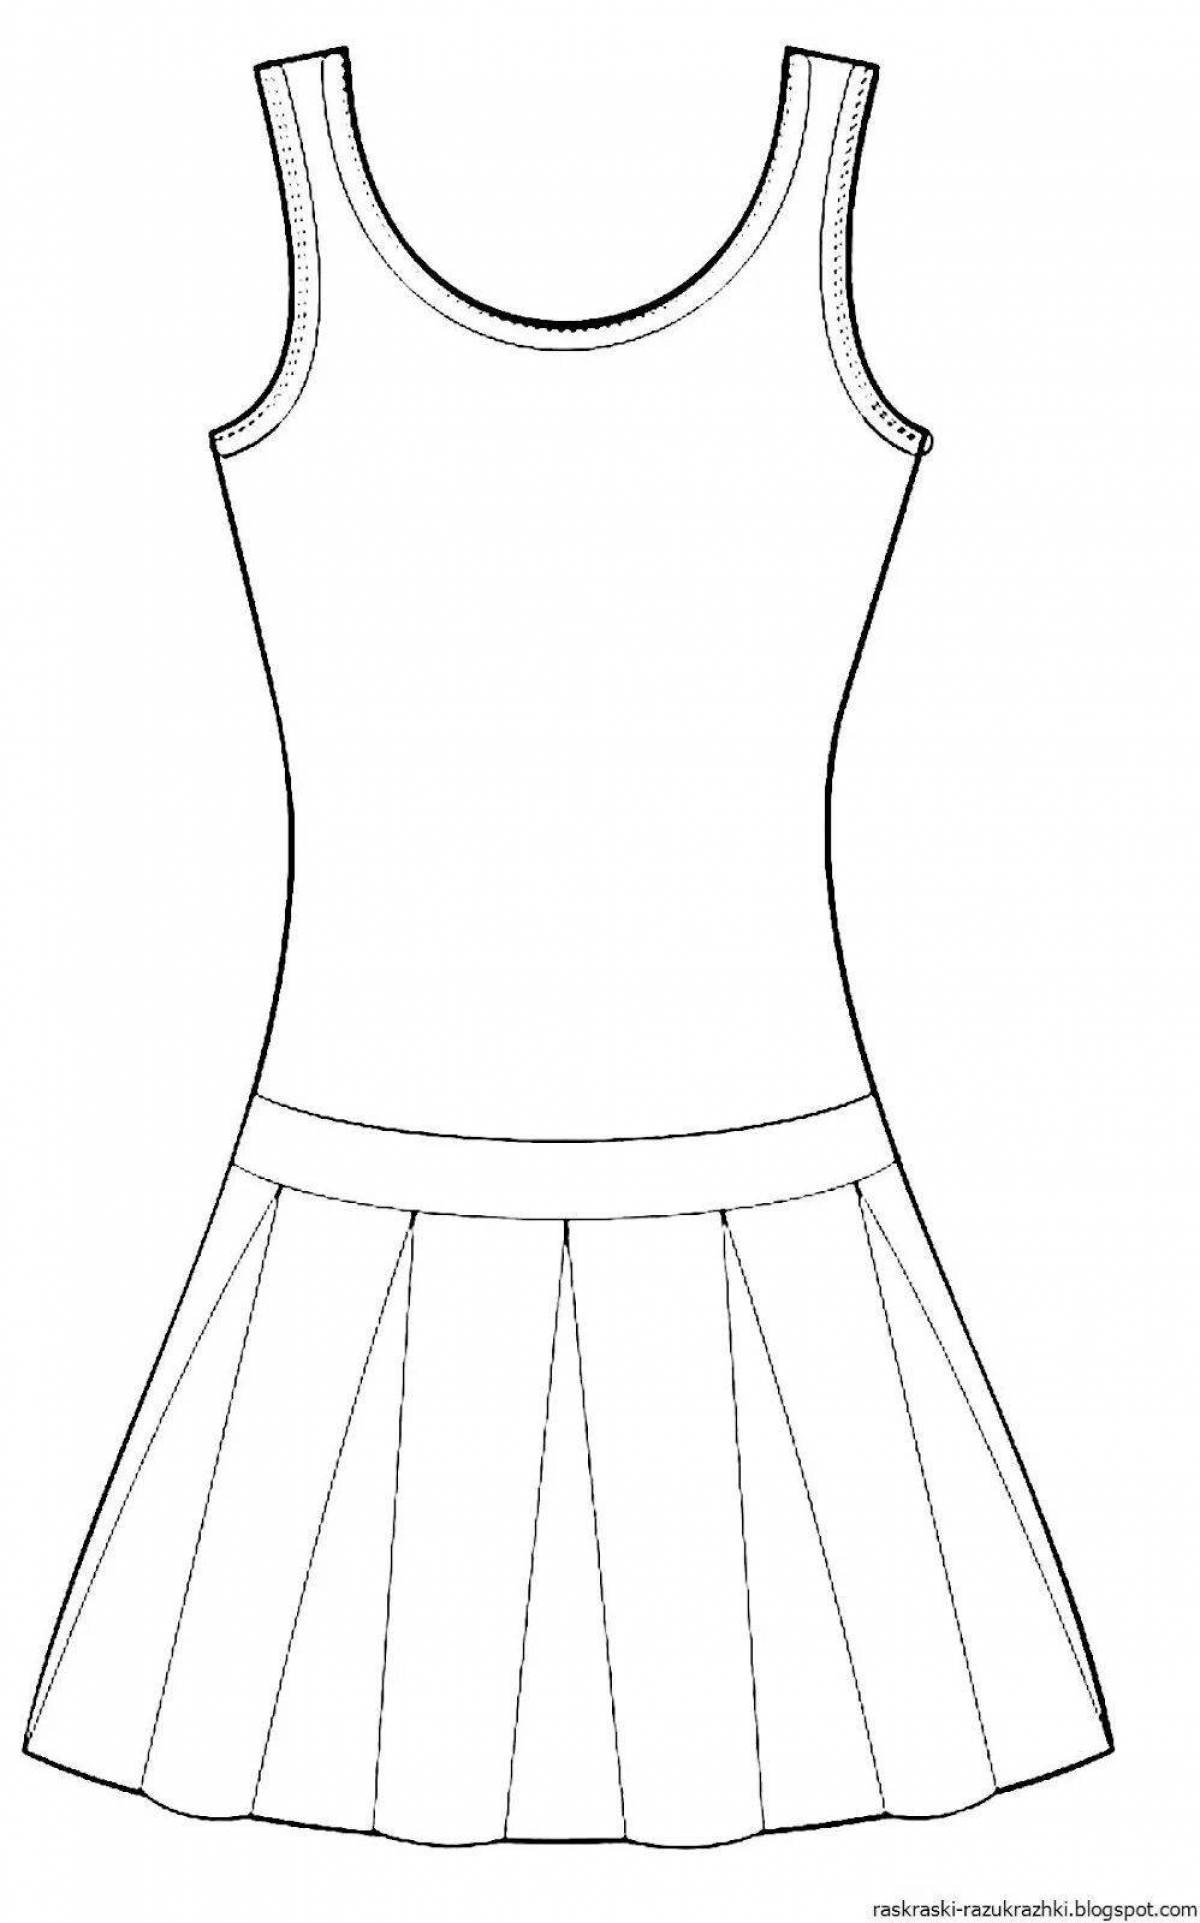 Adorable sundress pattern coloring book for kids